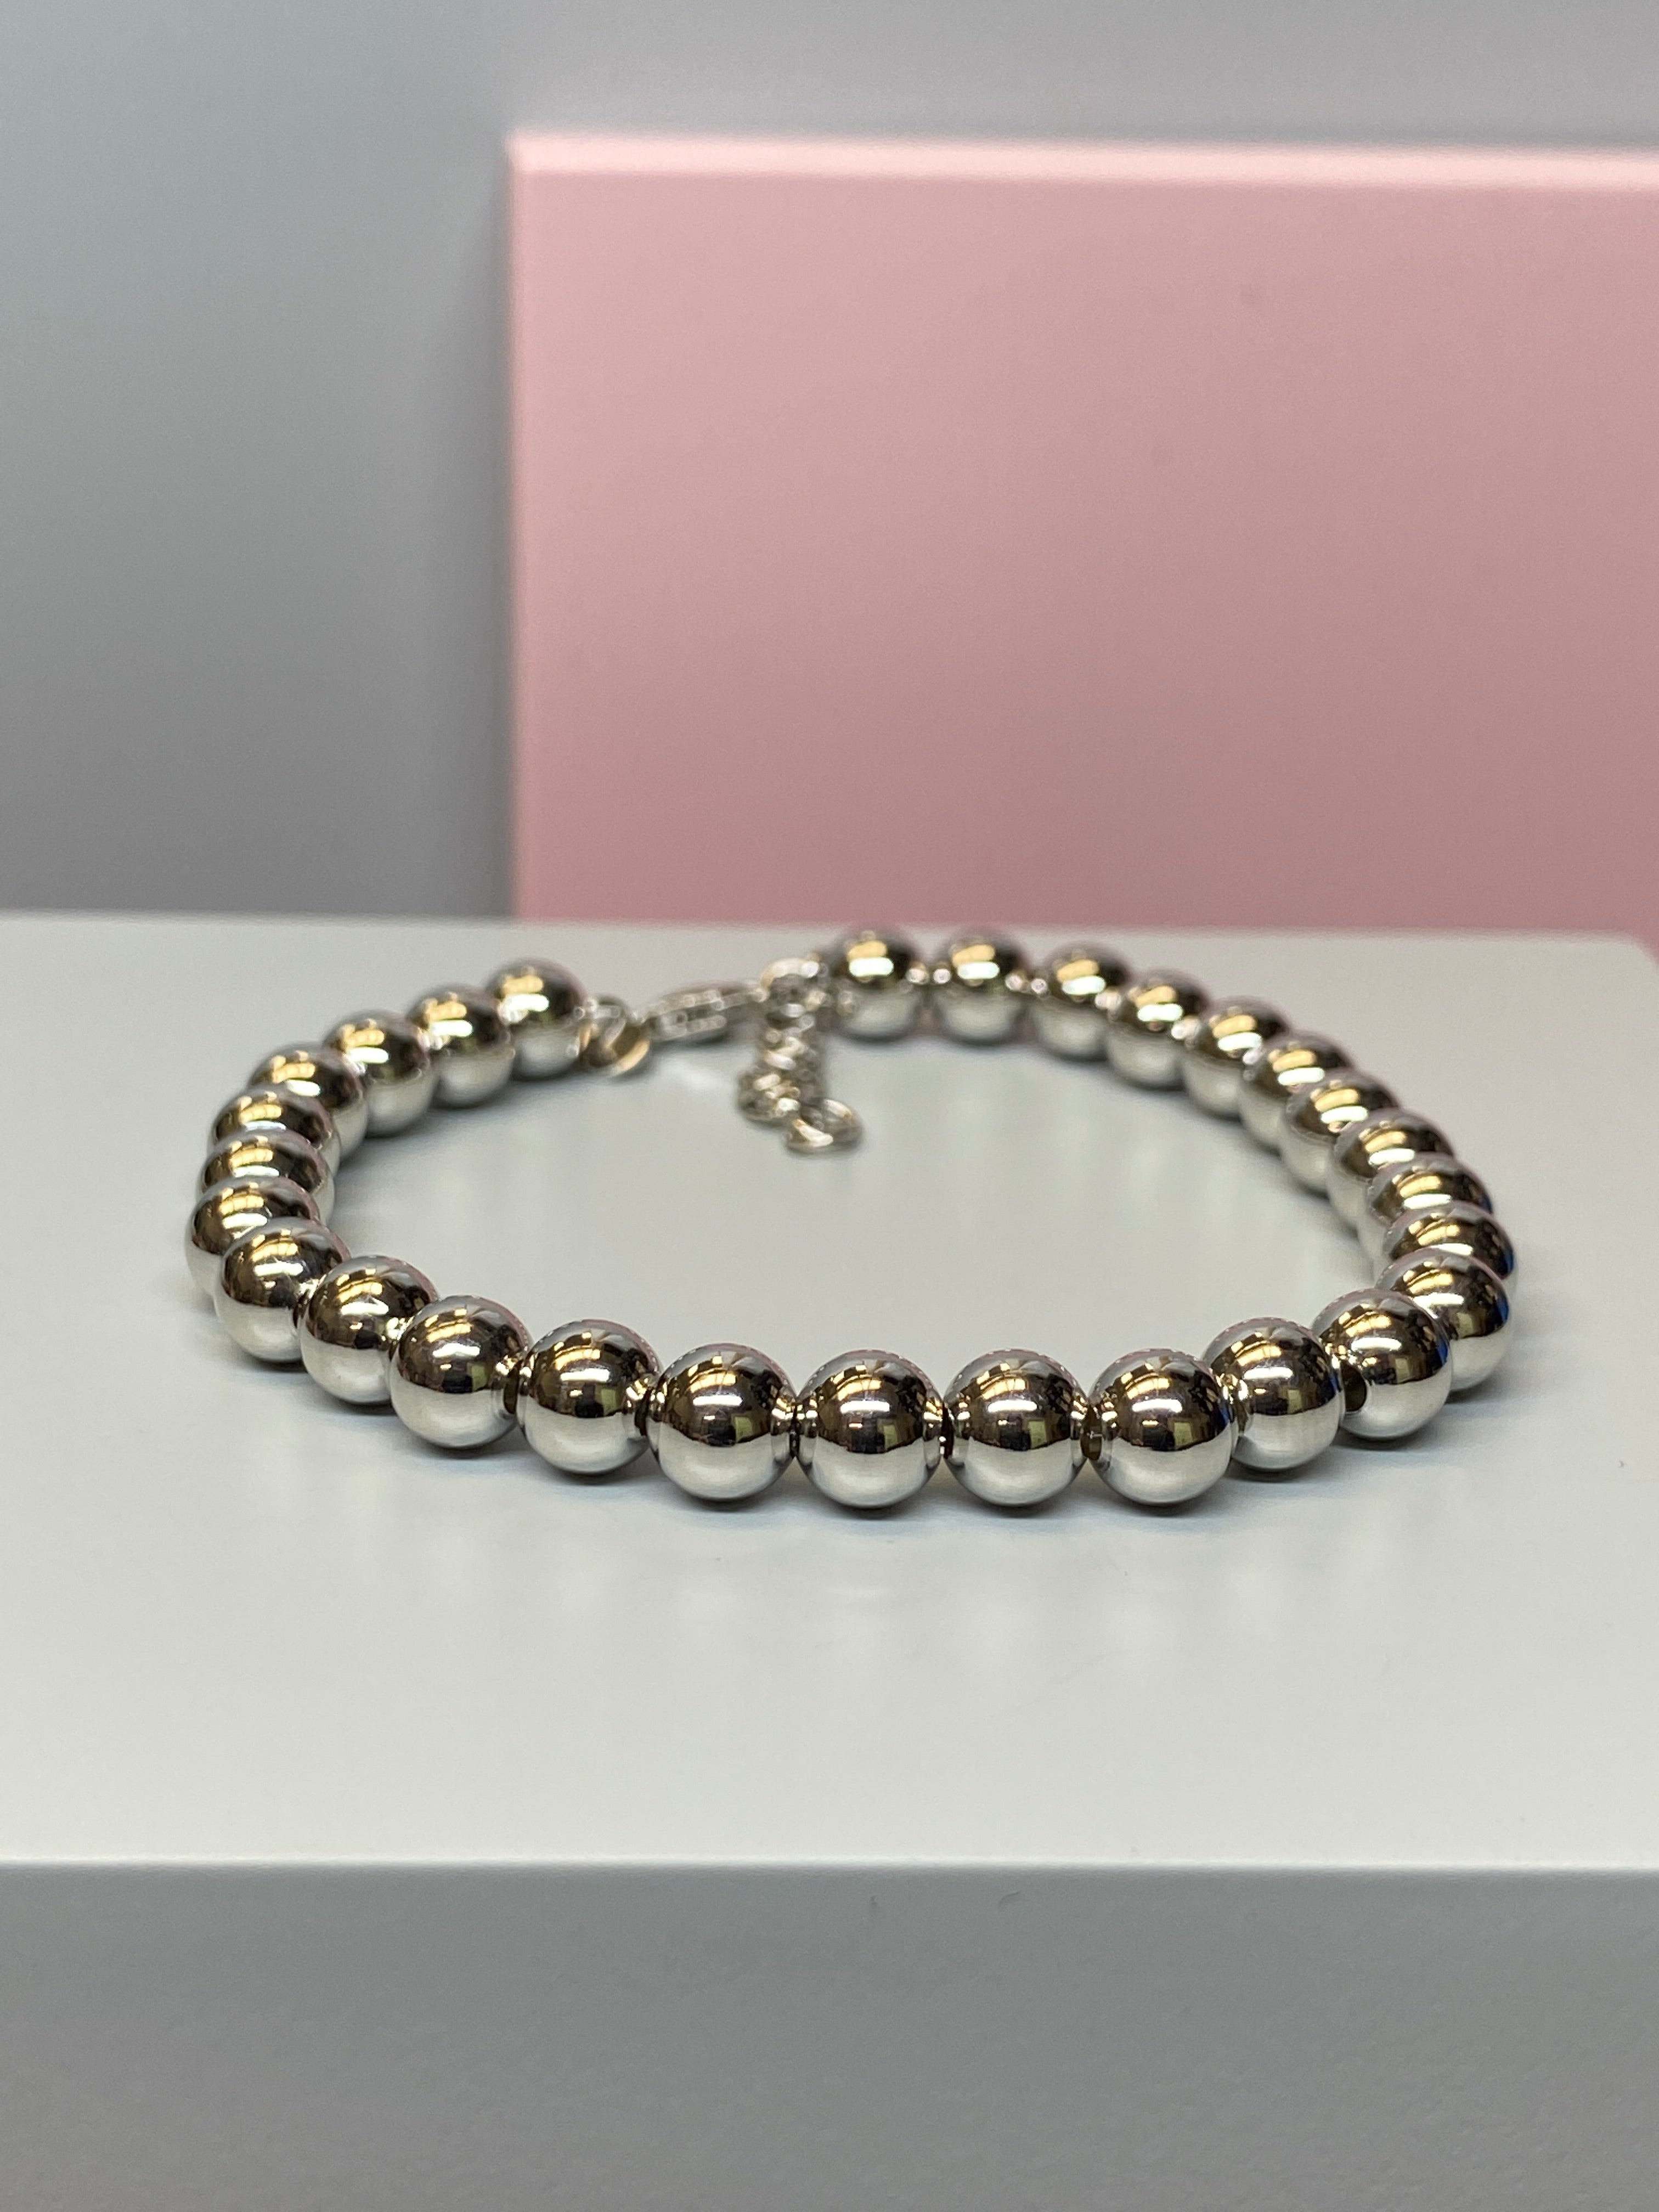 Silver Beaded Bracelet - Hallmark Jewellers Formby & The Jewellers Bench Widnes